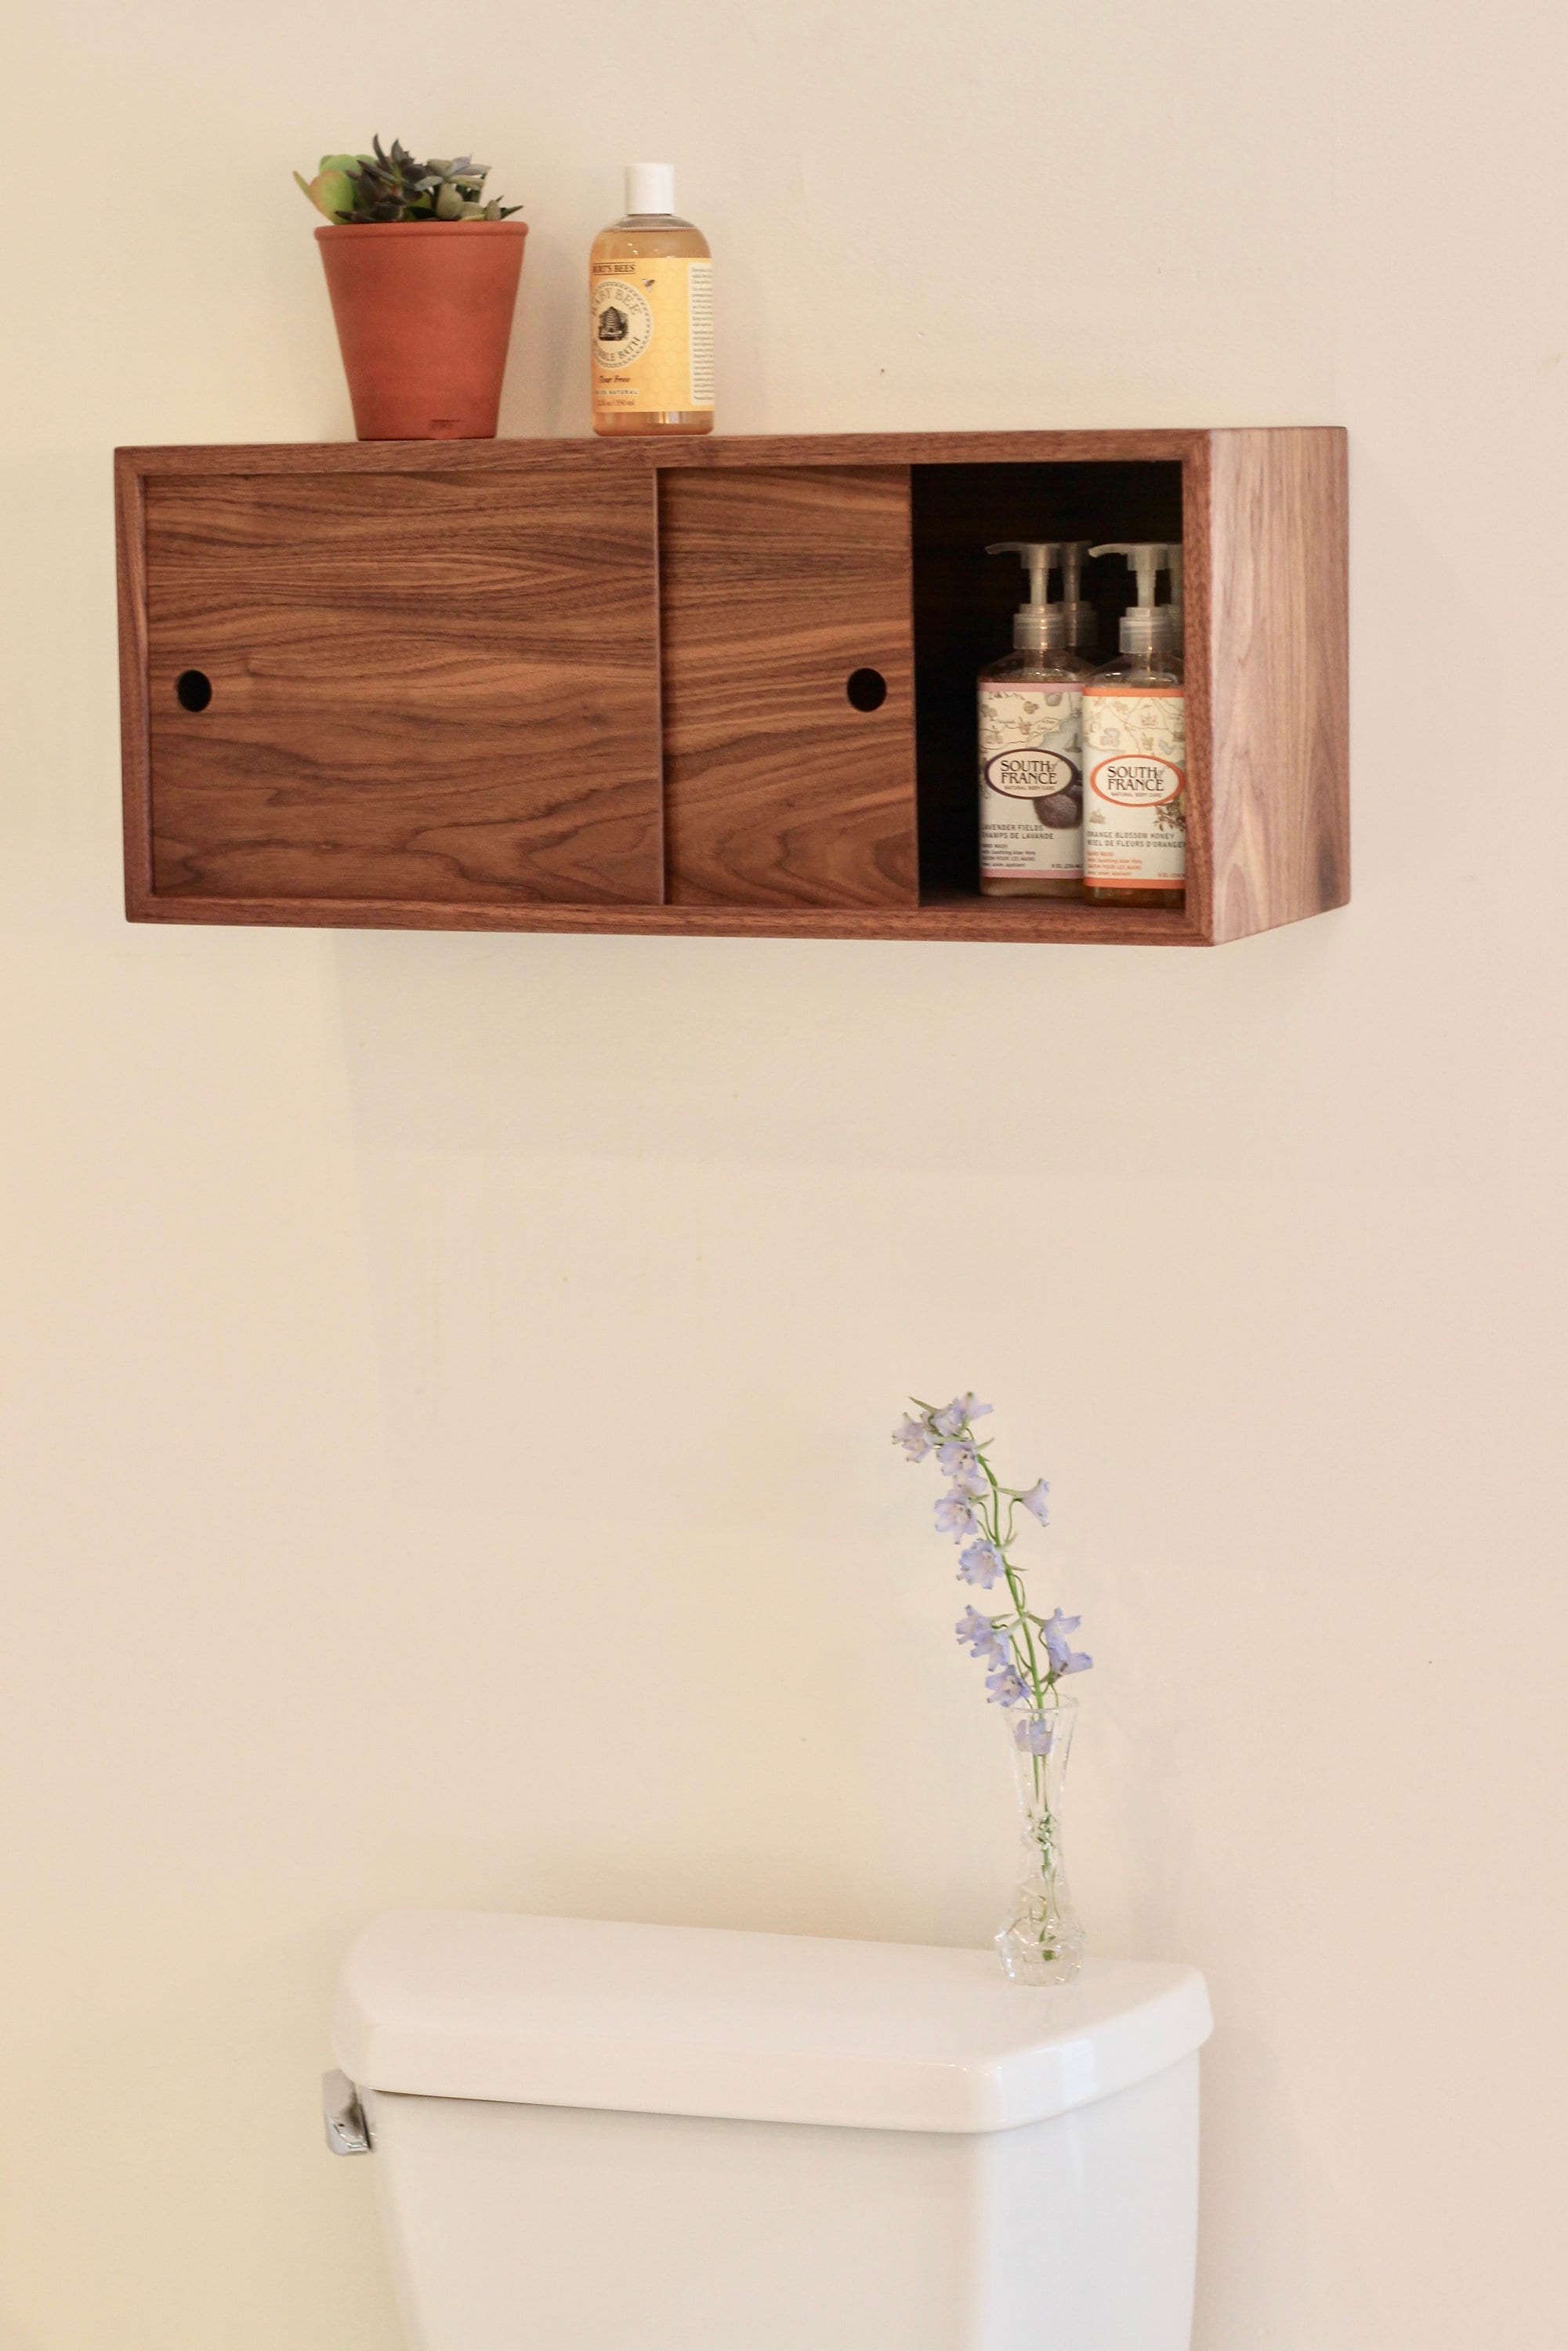 Mid Century Modern Small Floating Wall Cabinet, Bathroom Floating